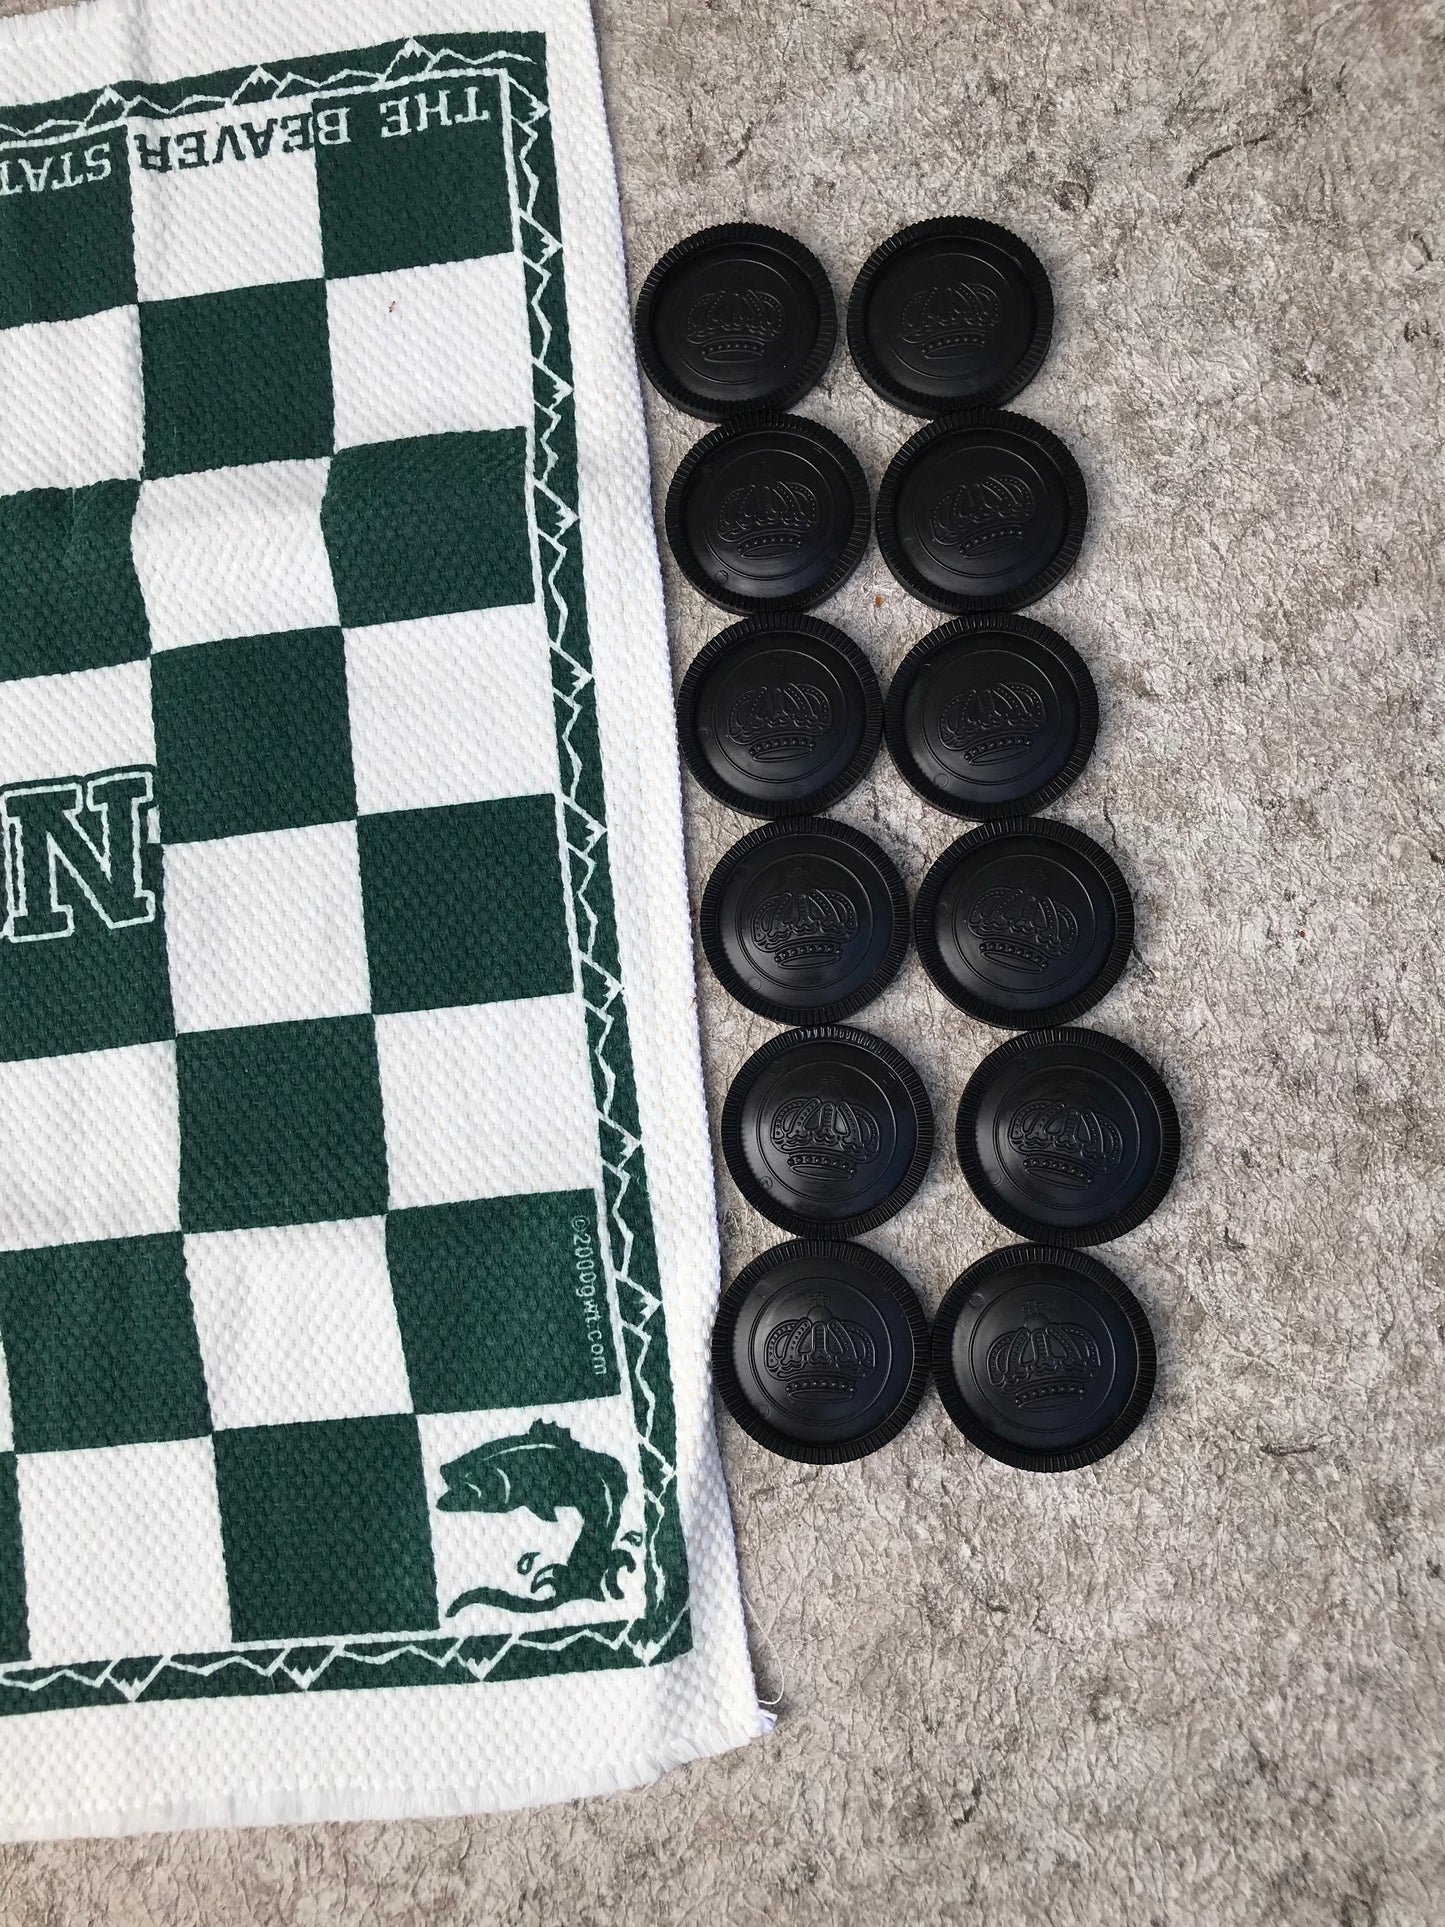 Y Game Giant Checkers As New Complete 28x28" Huge Indoor Outoor Fun